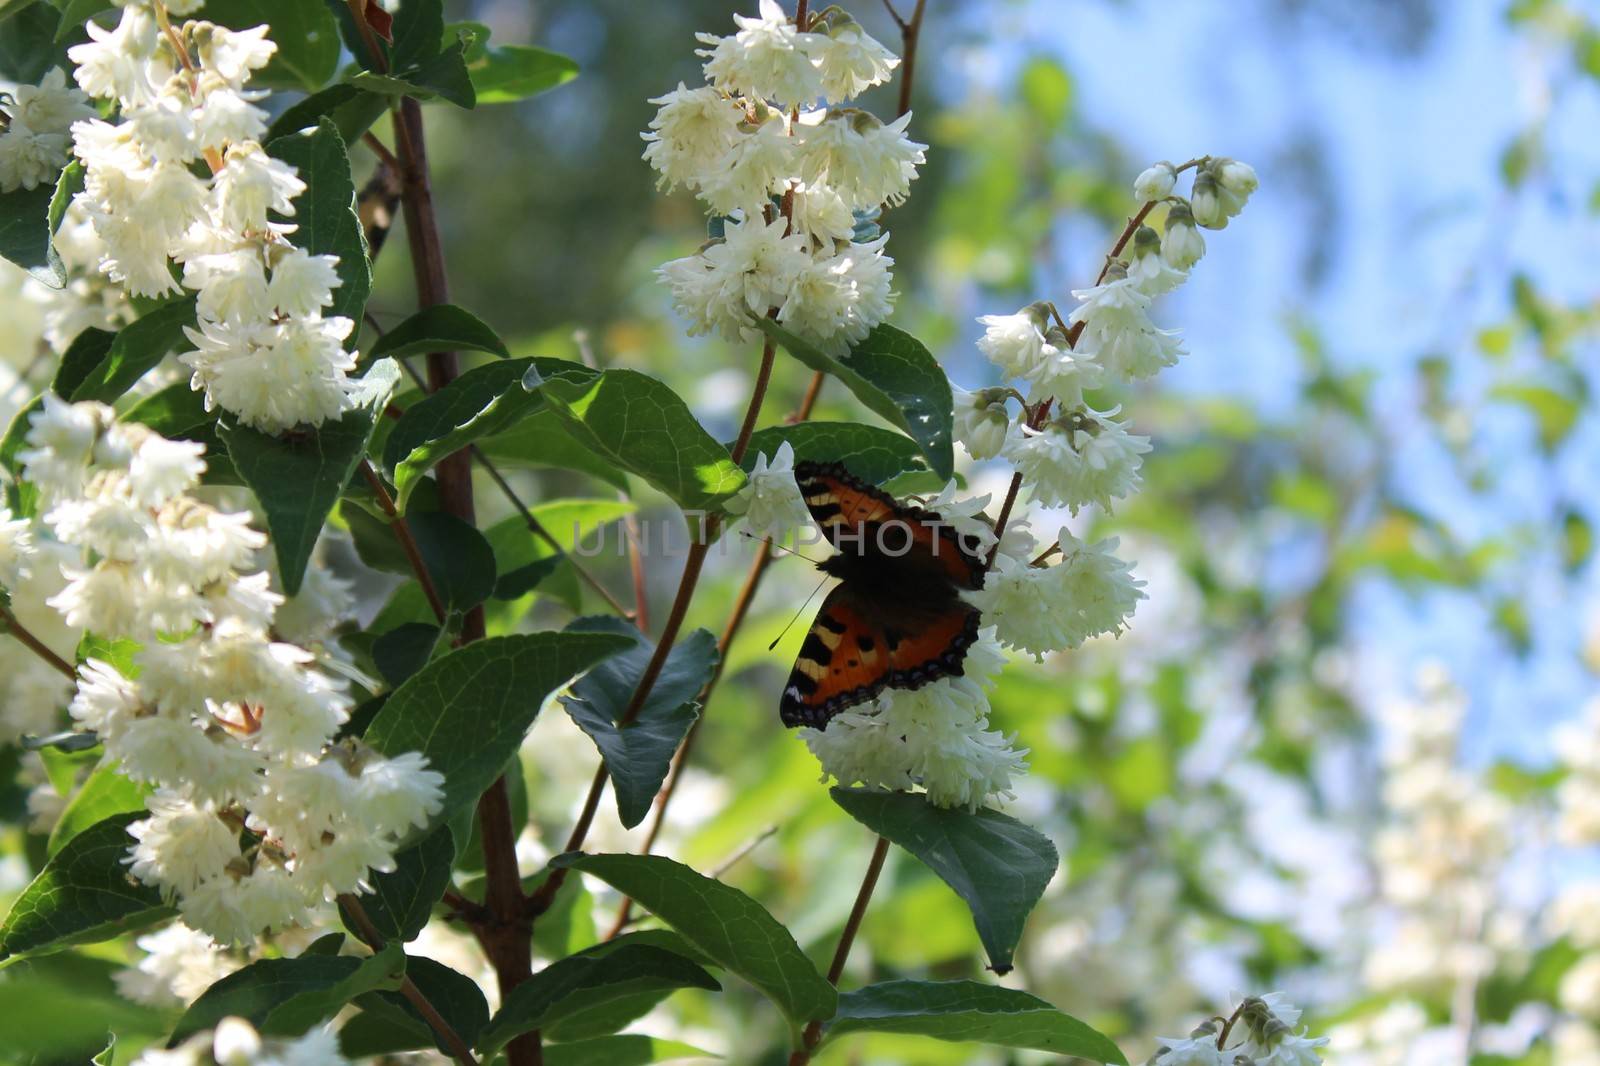 The picture shows a butterfly in the jasmine in the garden.